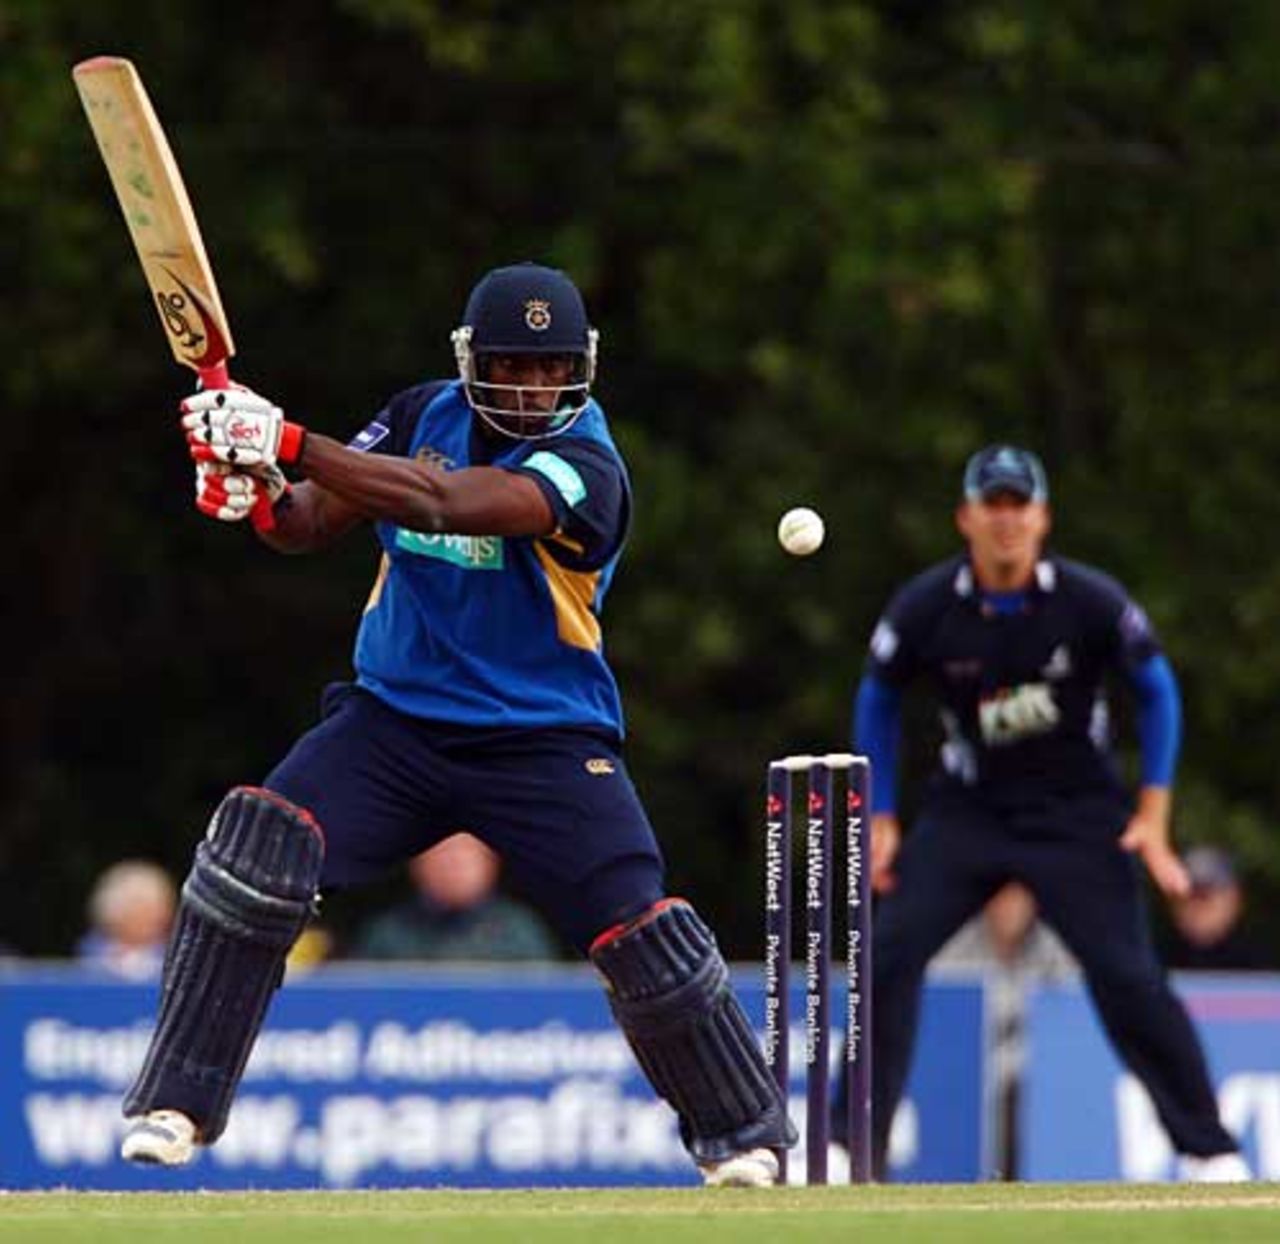 Michael Carberry hit 55 but Hampshire's chase fell short, Sussex v Hampshire, Pro40 Division One, Arundel, July 19, 2009